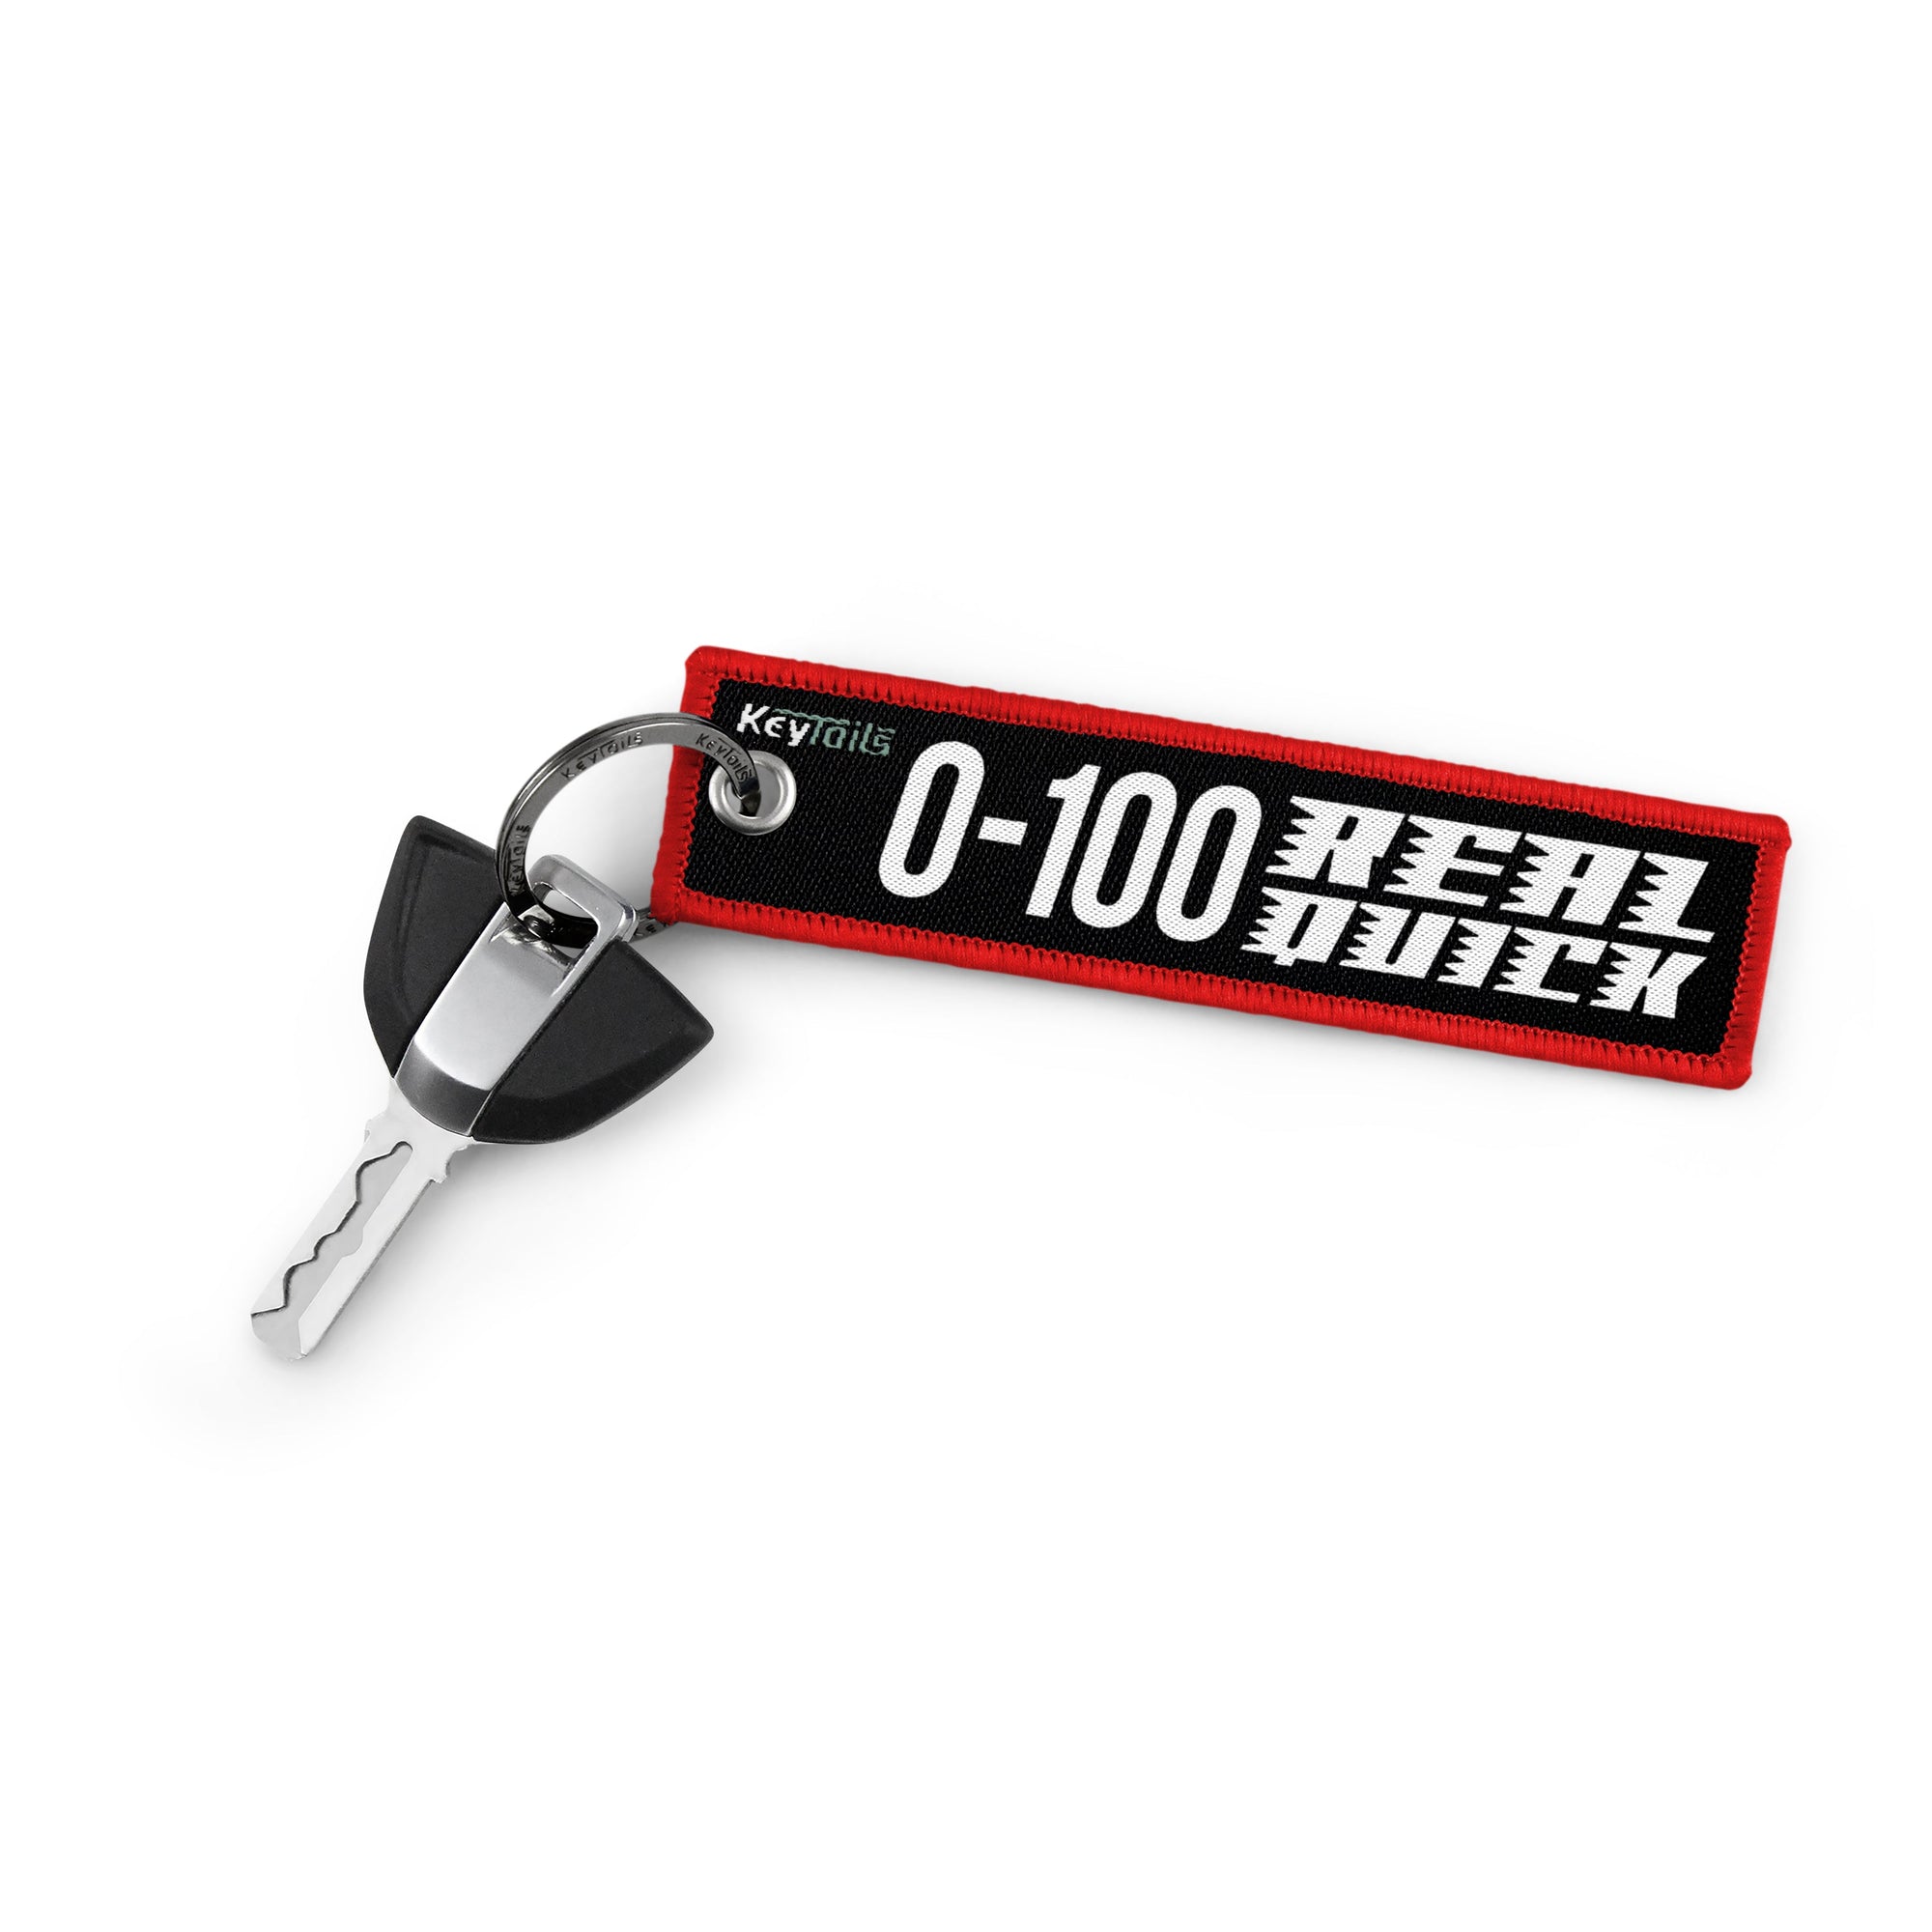 0-100 Real Quick Keychain, Key Tag - Red